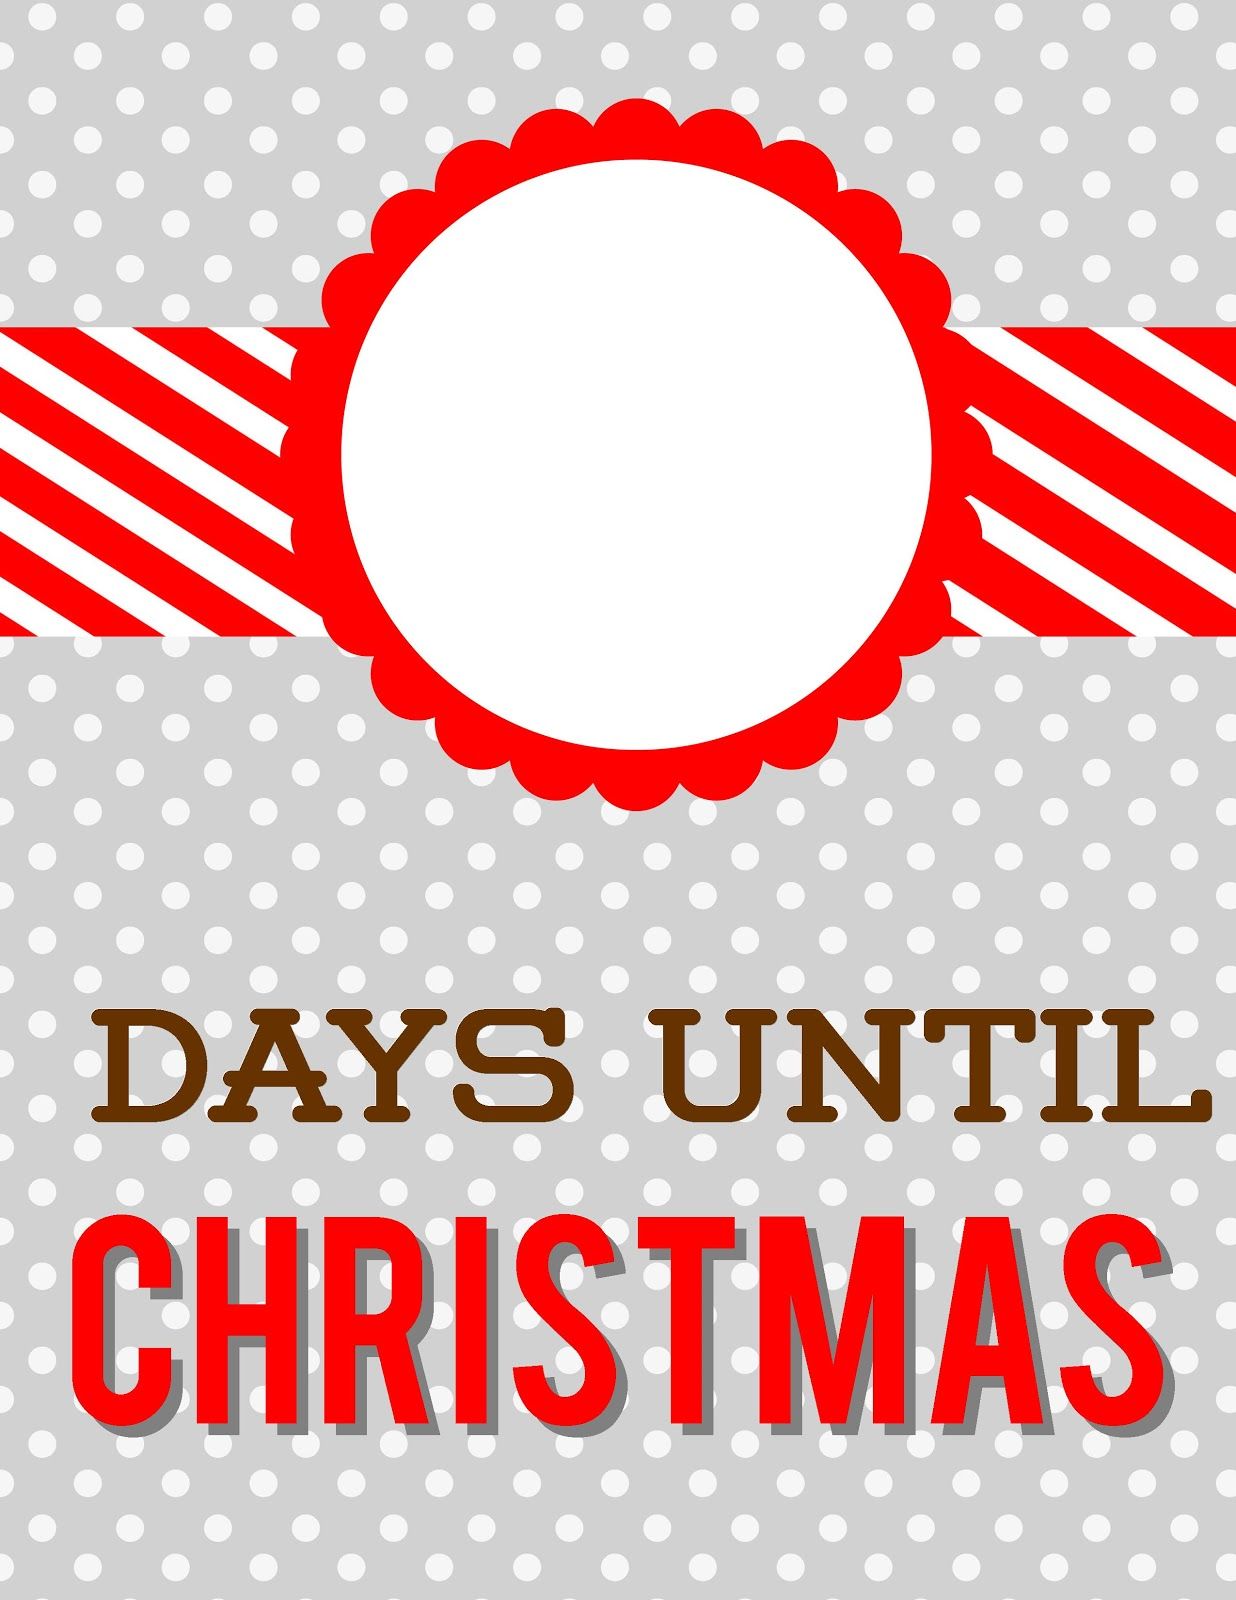 Days Until Christmas Dry Erase Countdown With Free Printable. Days Until Christmas, Christmas Countdown Printable, Days Till Christmas